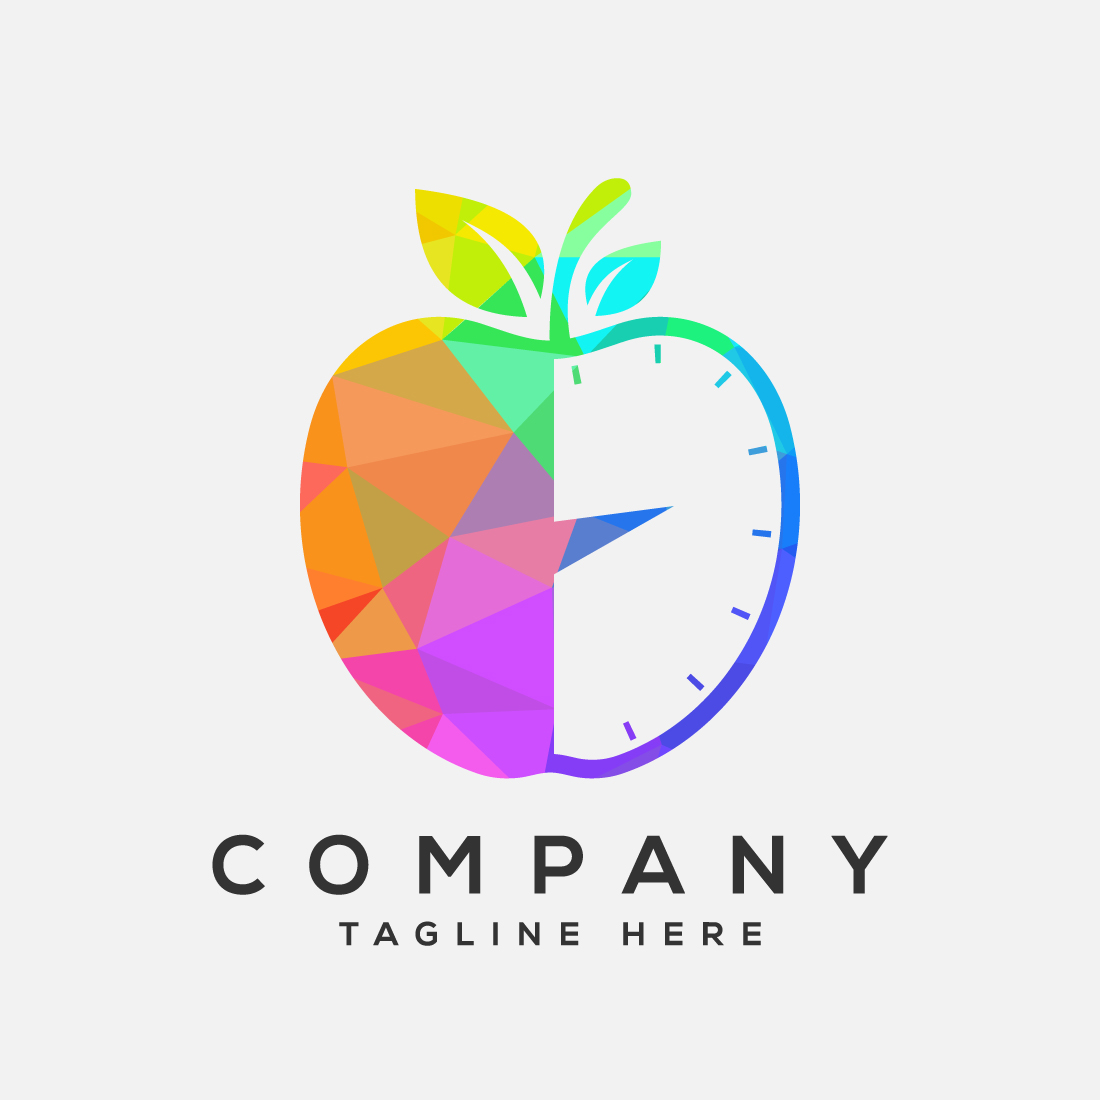 Low poly style apple sign symbol in flat style on white background, Diet logo concept preview image.